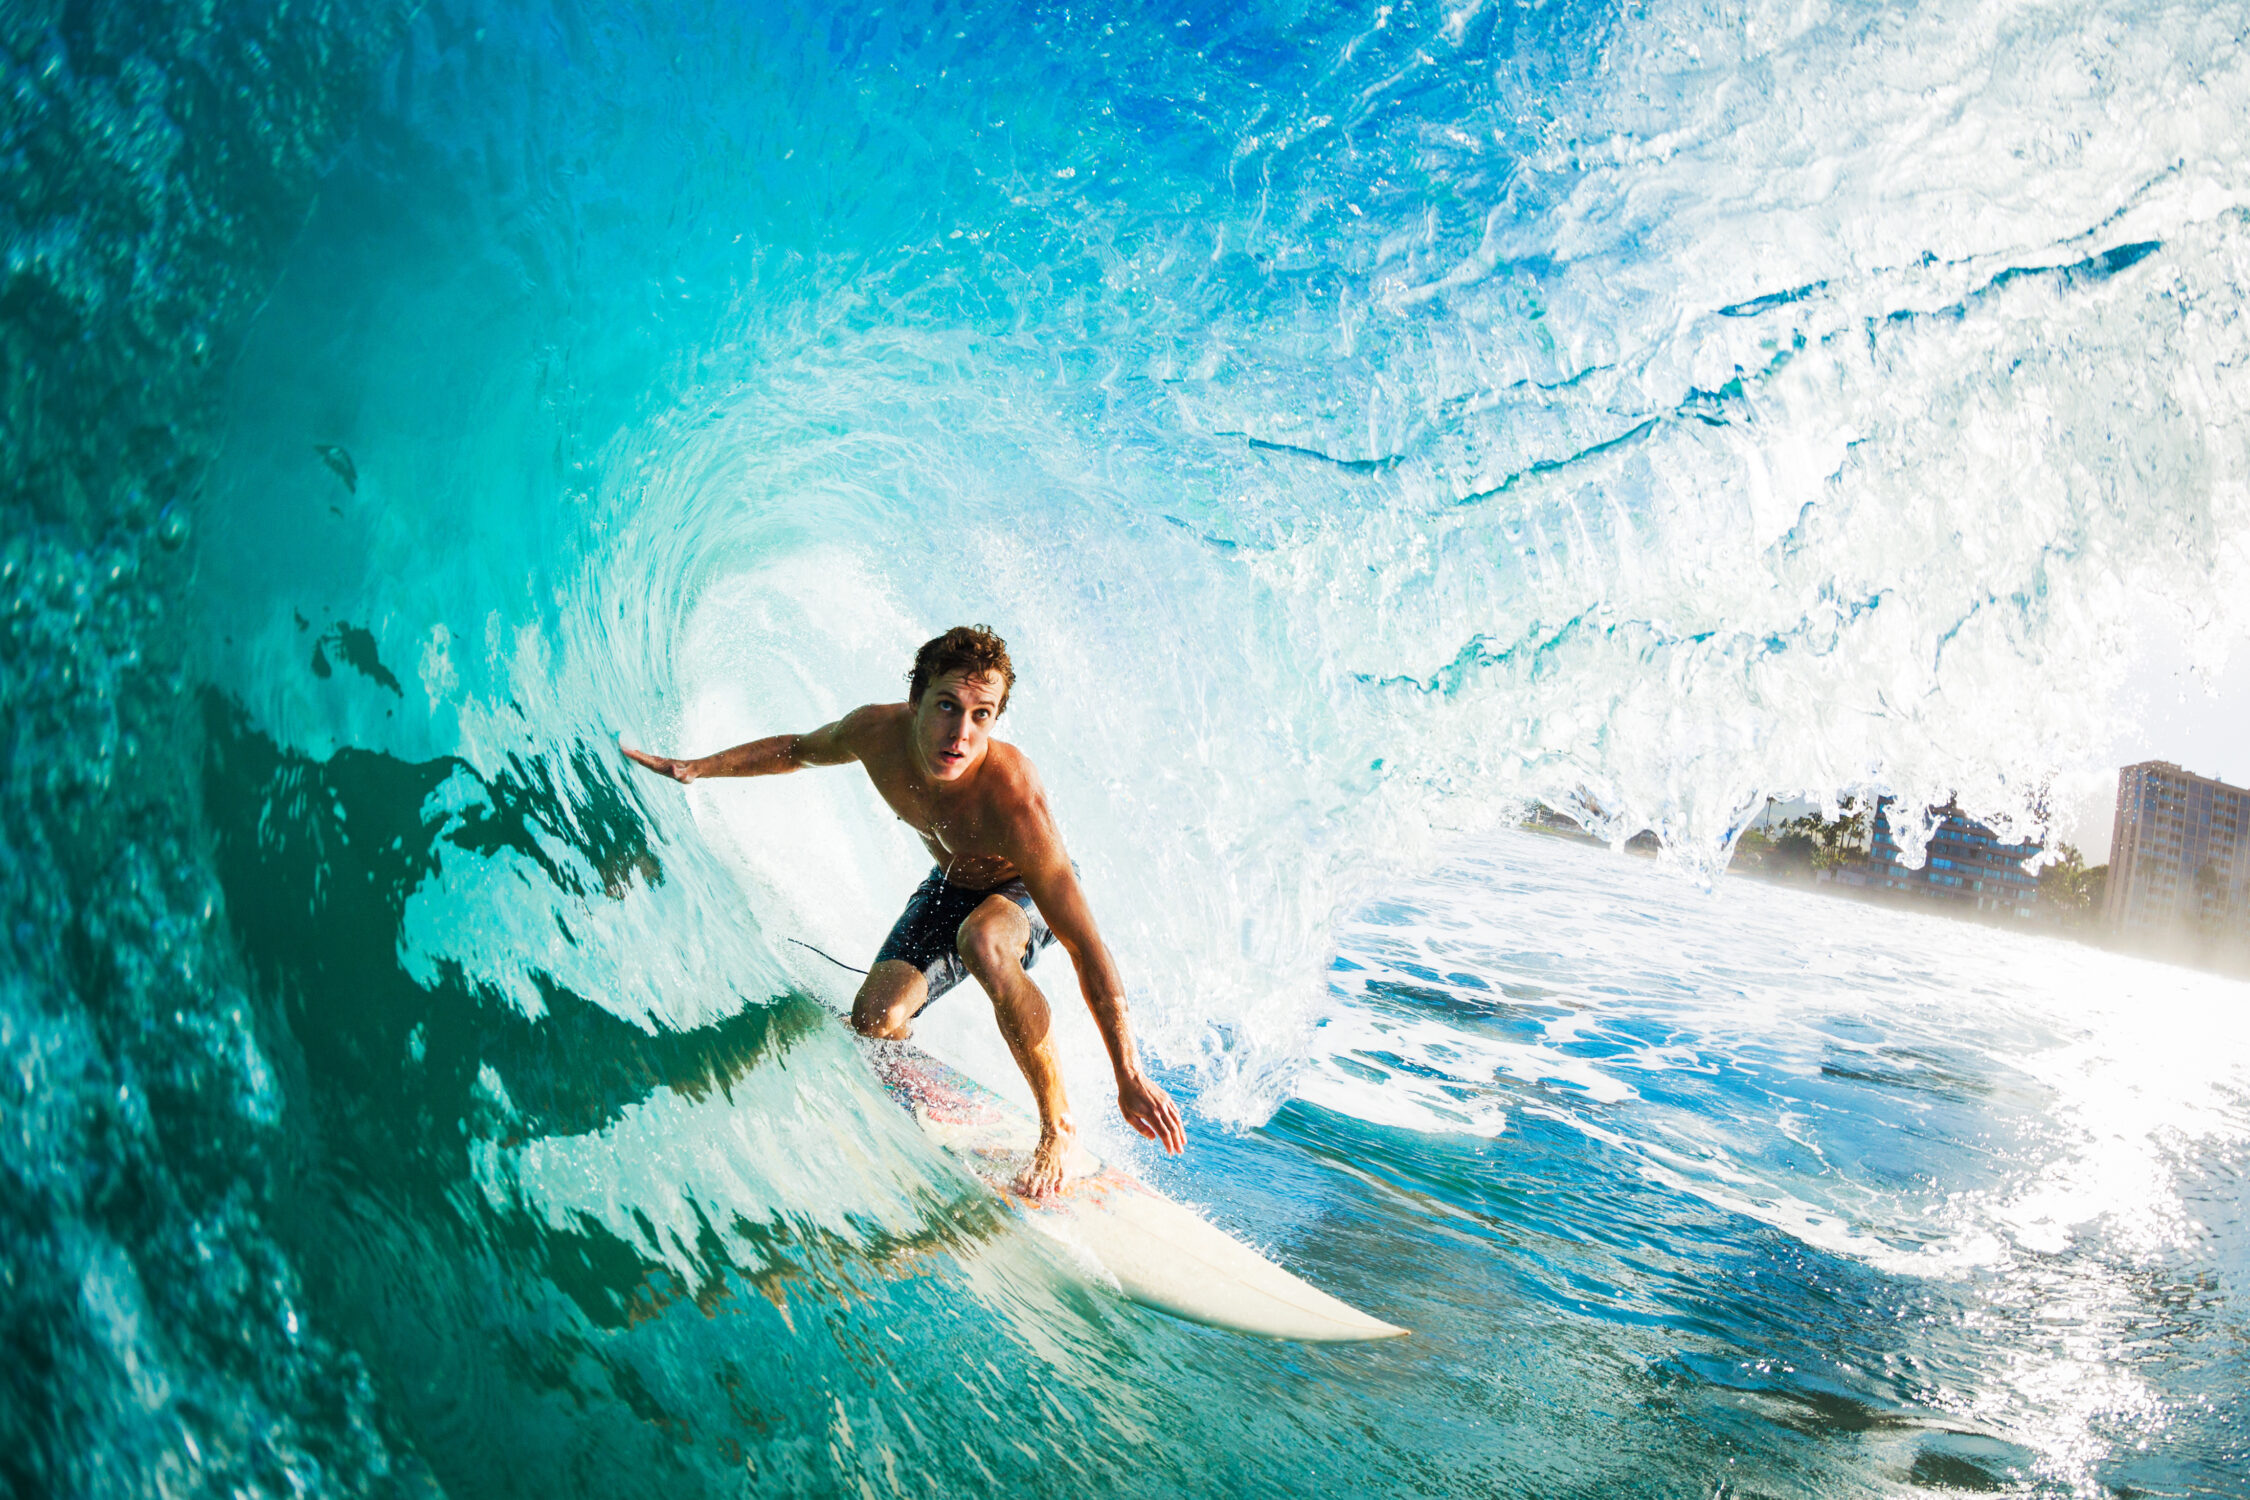 Surfer on Blue Ocean Wave Example of Balance in Life